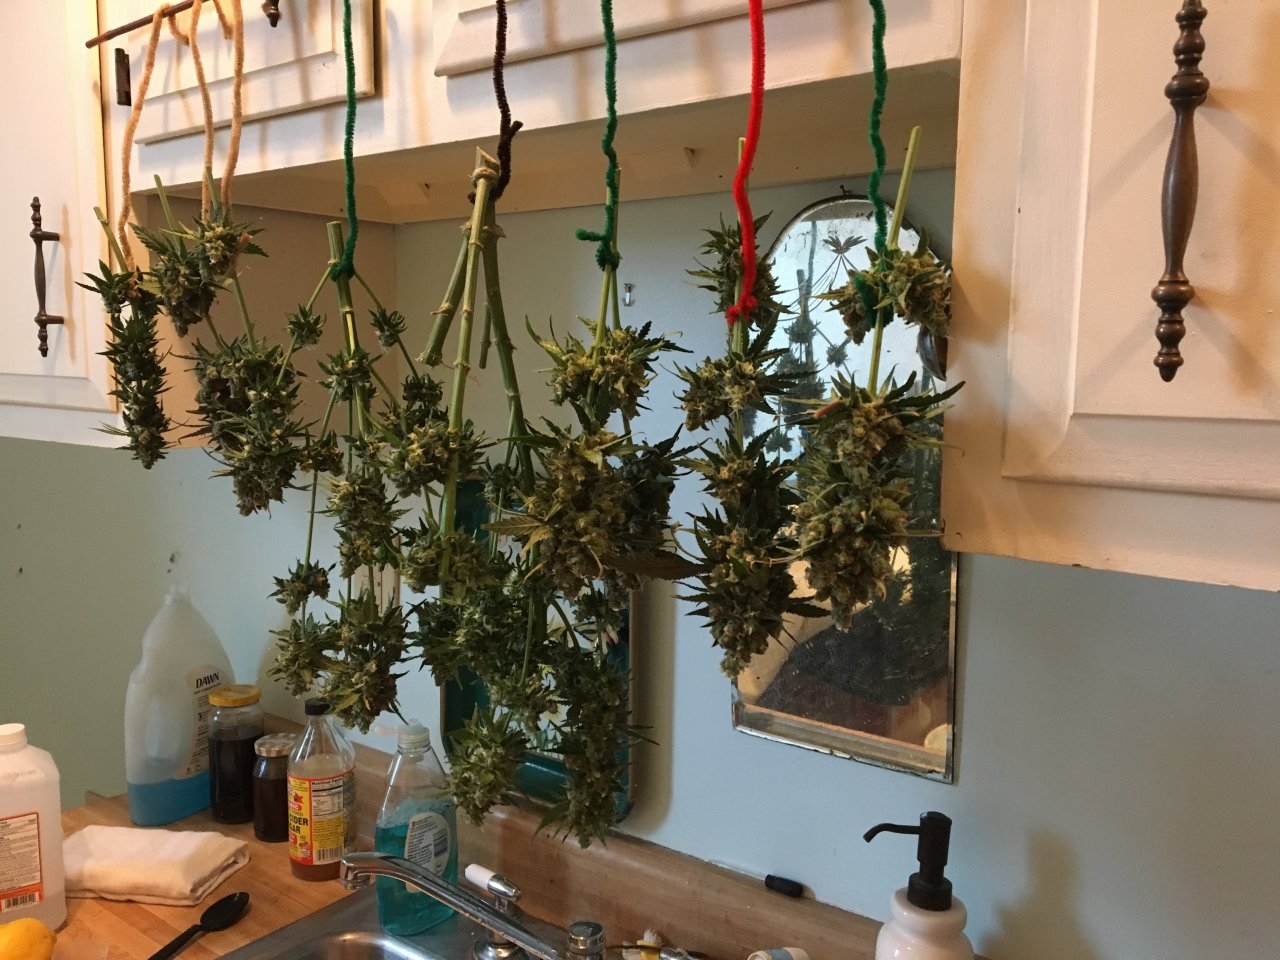 Candy Cane 5 Harvest: hanging